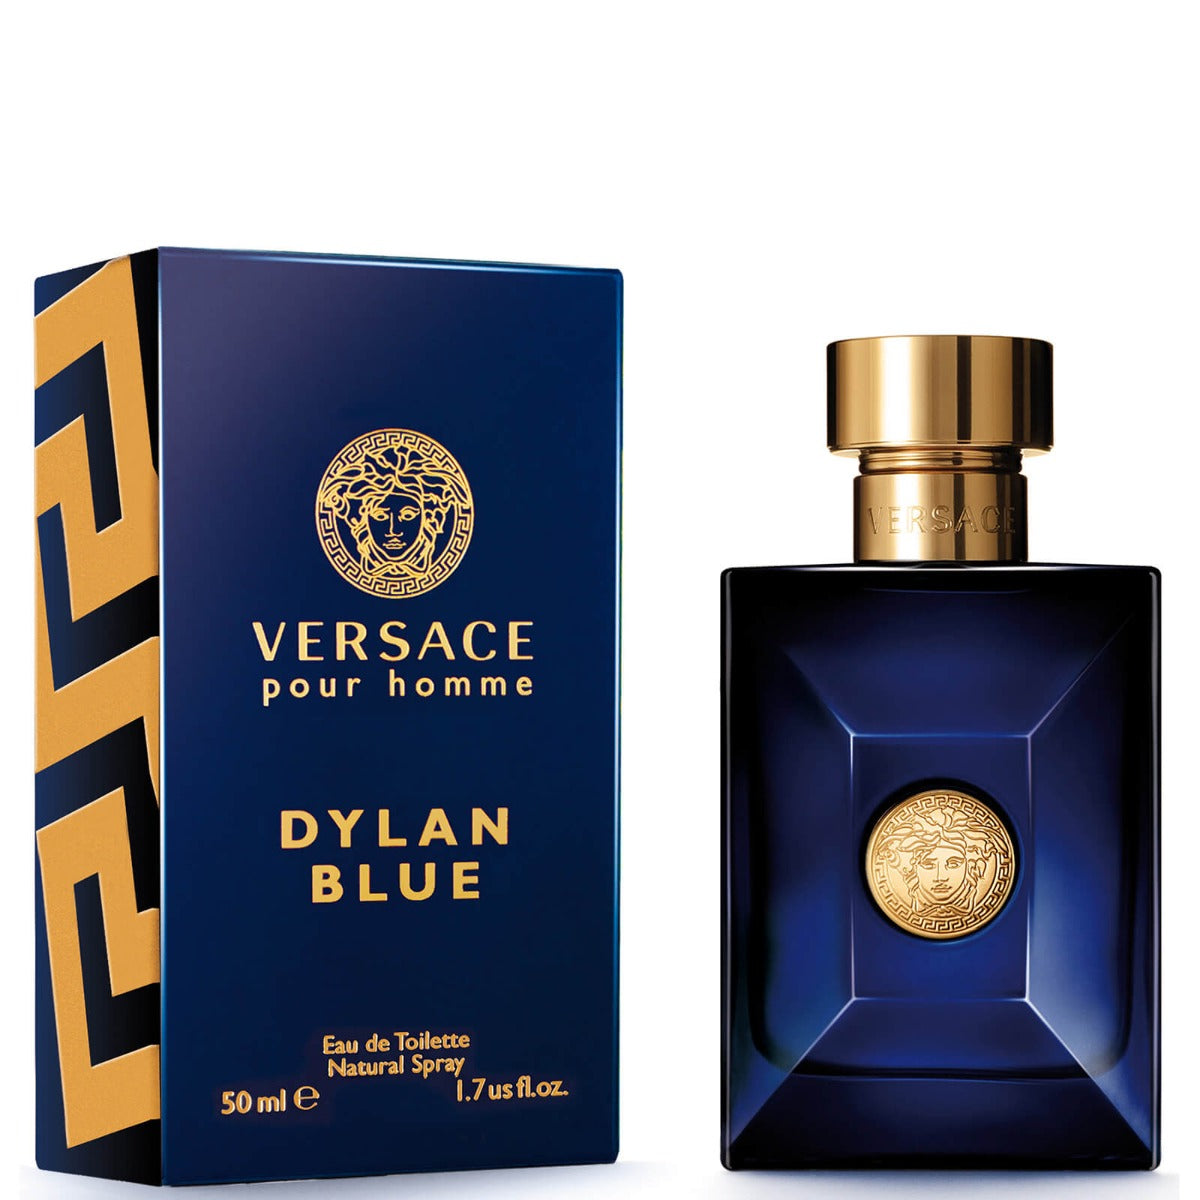 VERSACE POUR HOMME DYLAN BLUE FOR MEN EDT 50 ml - samawa perfumes 